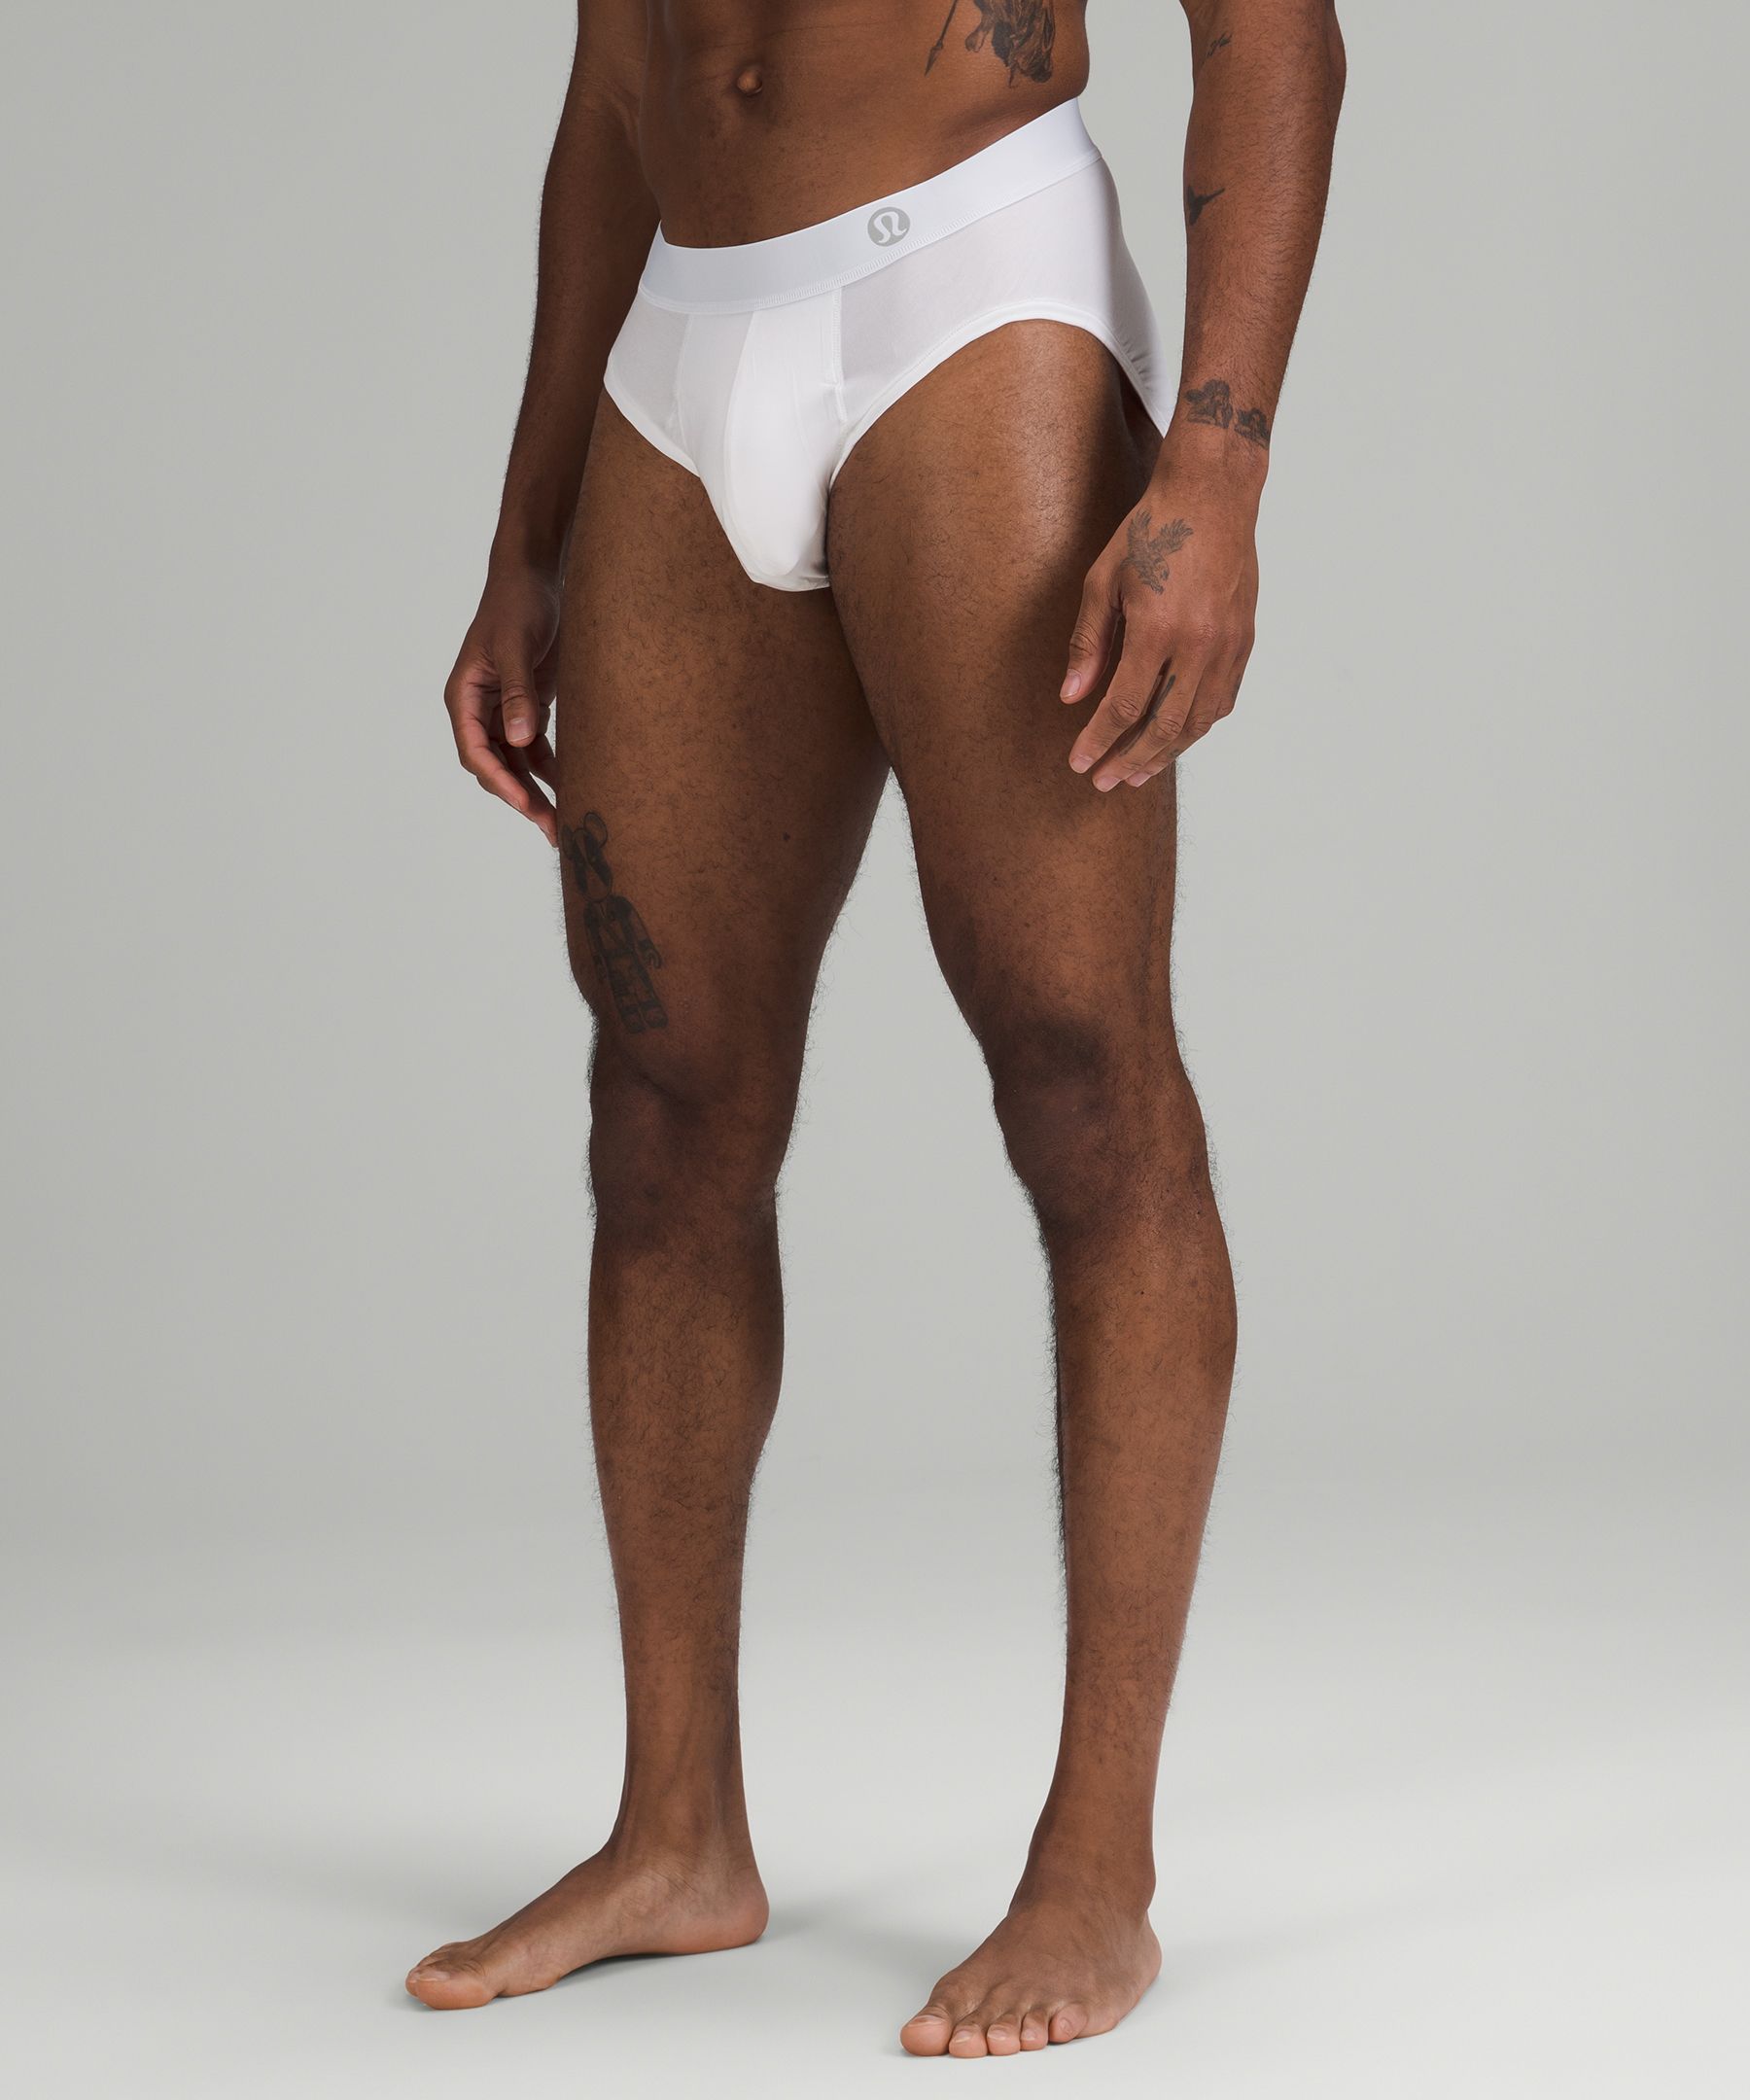 Thoughts on the new men's Always In Motion Brief? : r/lululemon